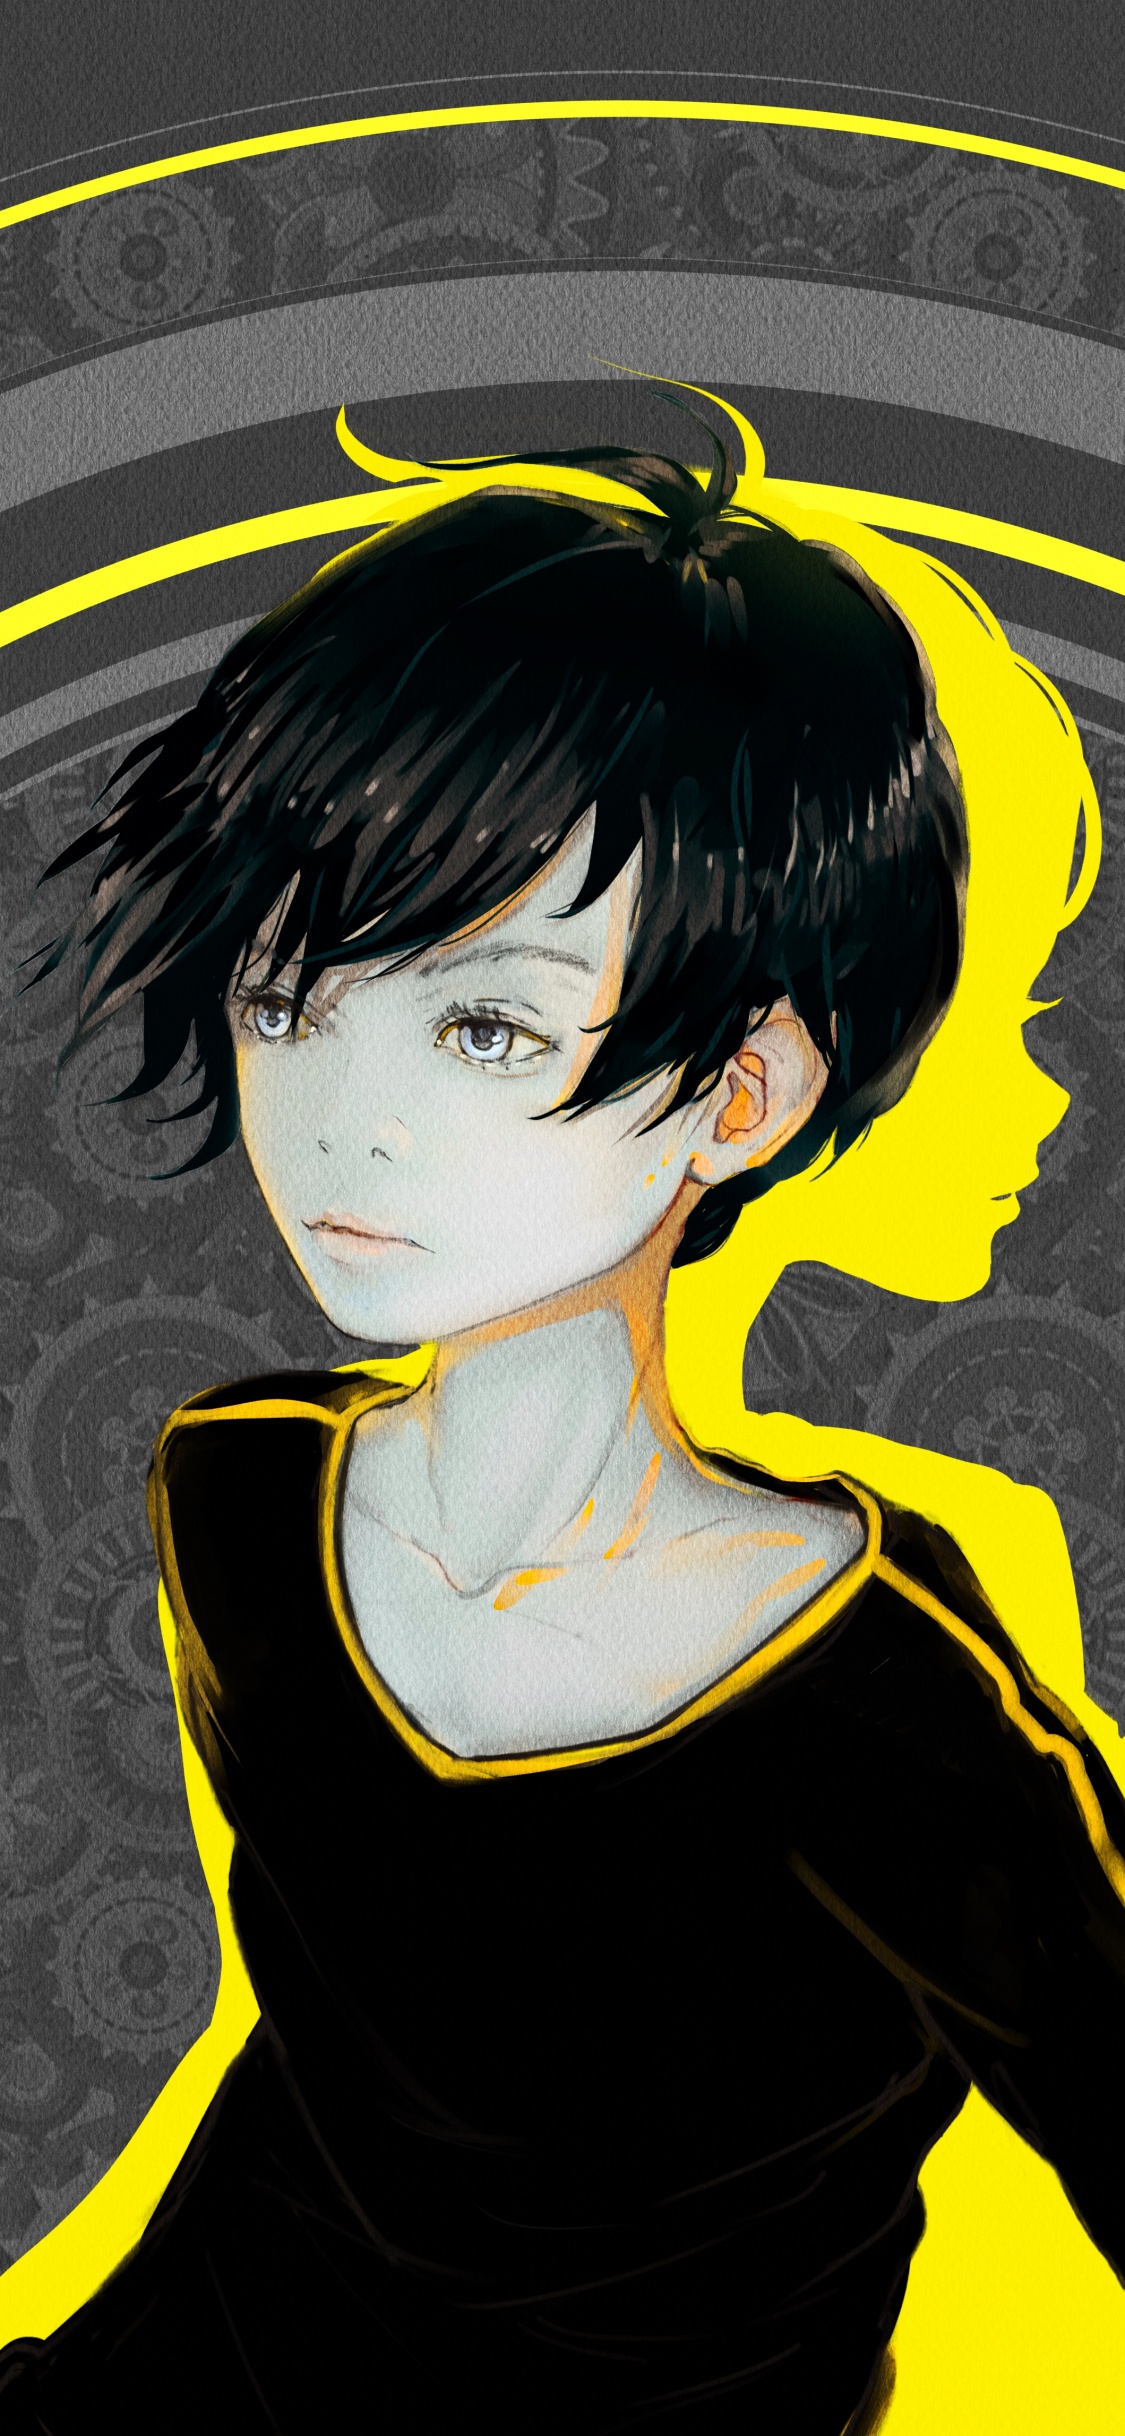 Black Haired Male Anime Character. Wallpaper in 1125x2436 Resolution